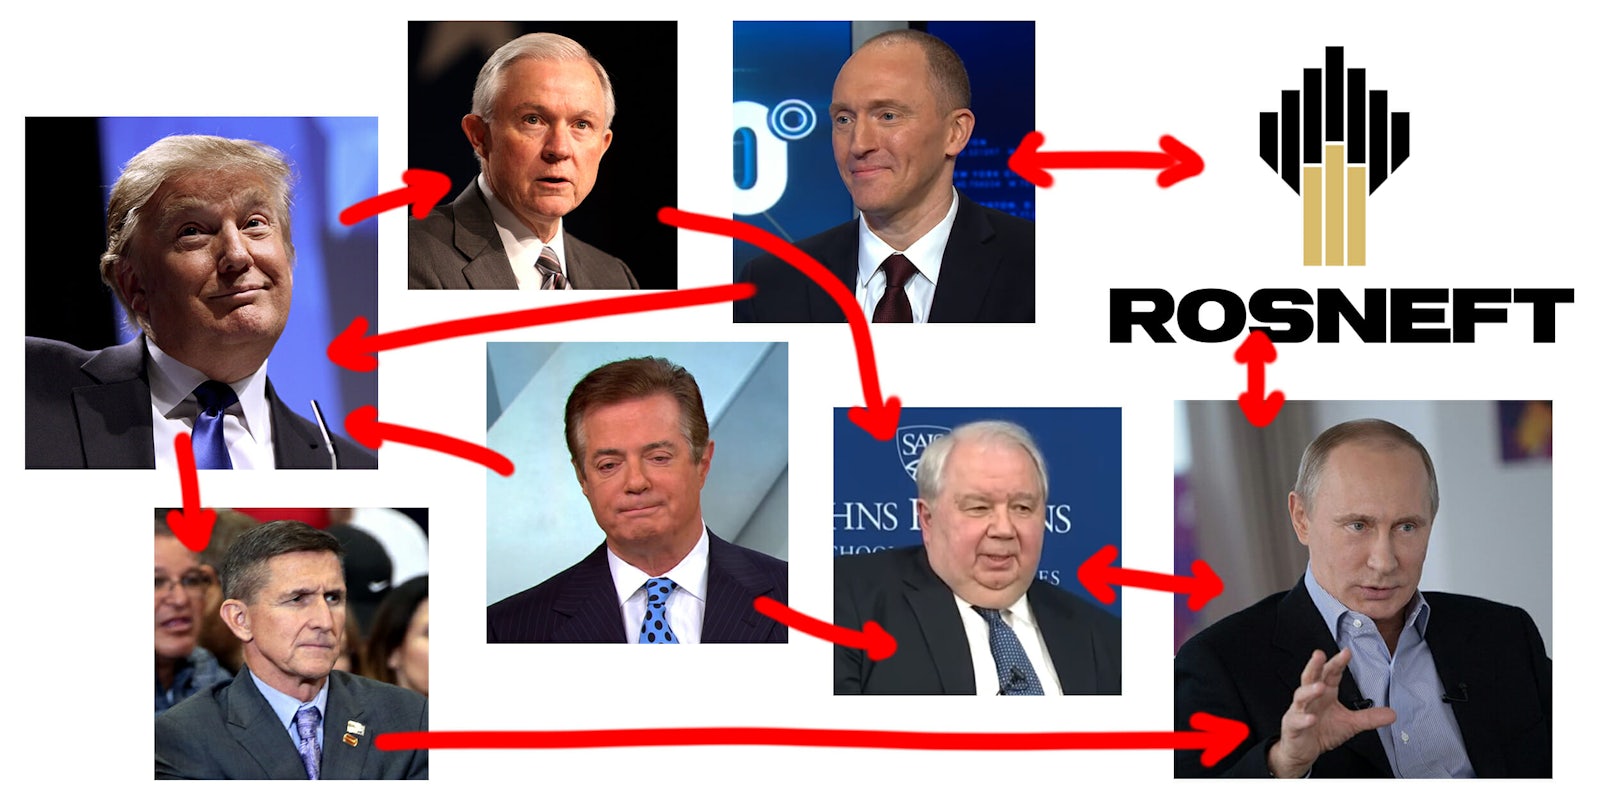 Hand-drawn arrows pointing out relationships between Russia and Trump administration